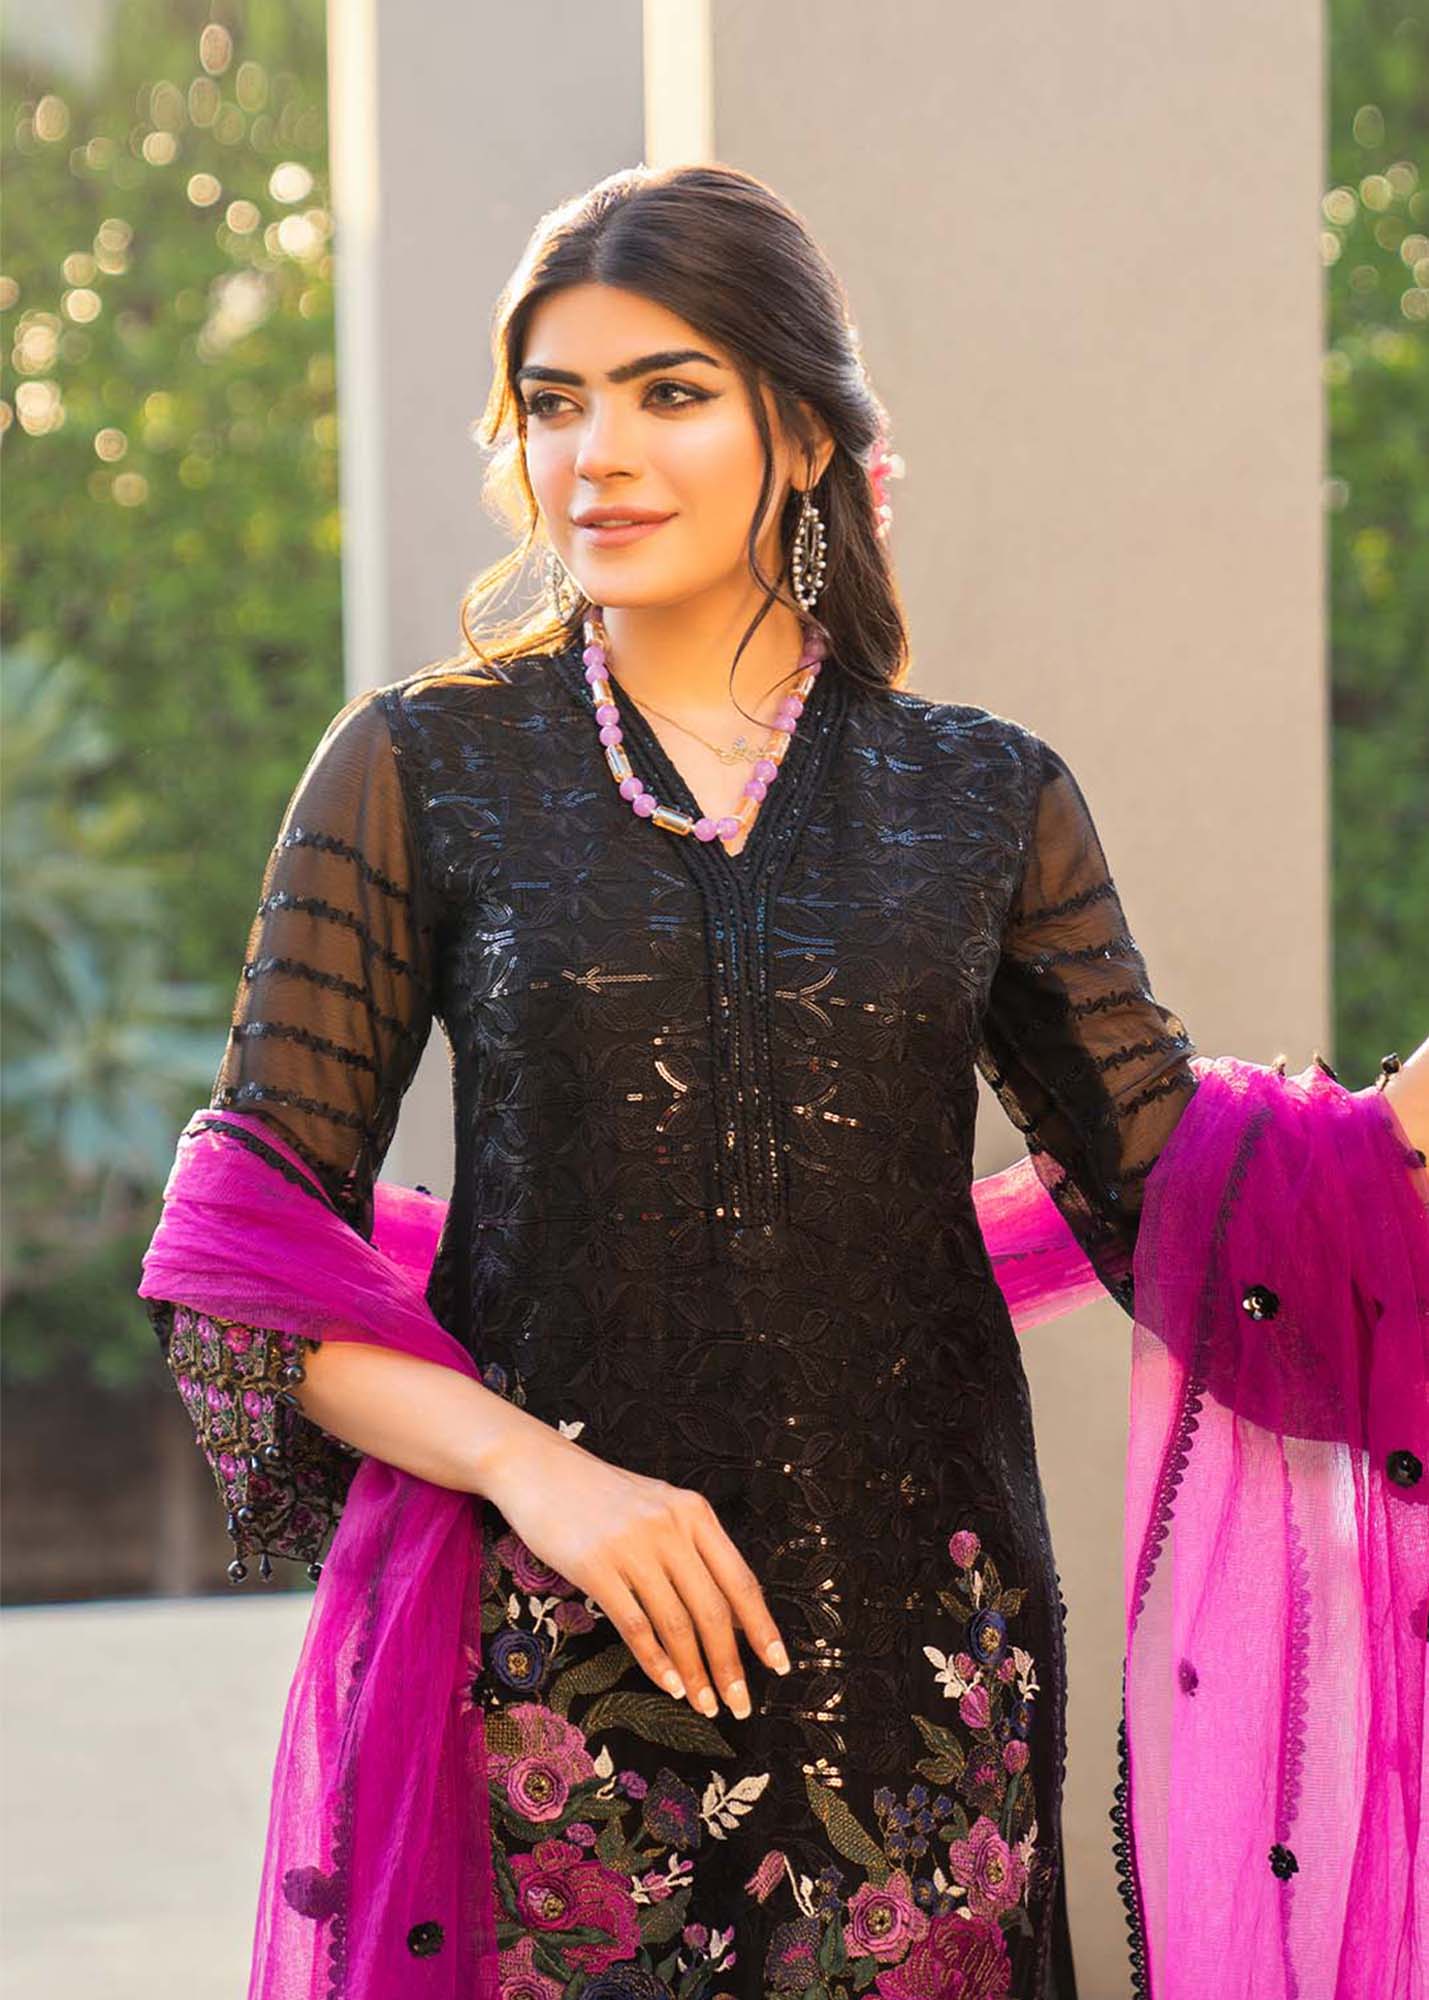 Mushq - 𝗭𝗲𝗲𝗻𝗮𝘁 | 𝗖𝗮𝘀𝘂𝗮𝗹 𝗣𝗿𝗲𝘁 BLAZE The embroidered... |  Facebook